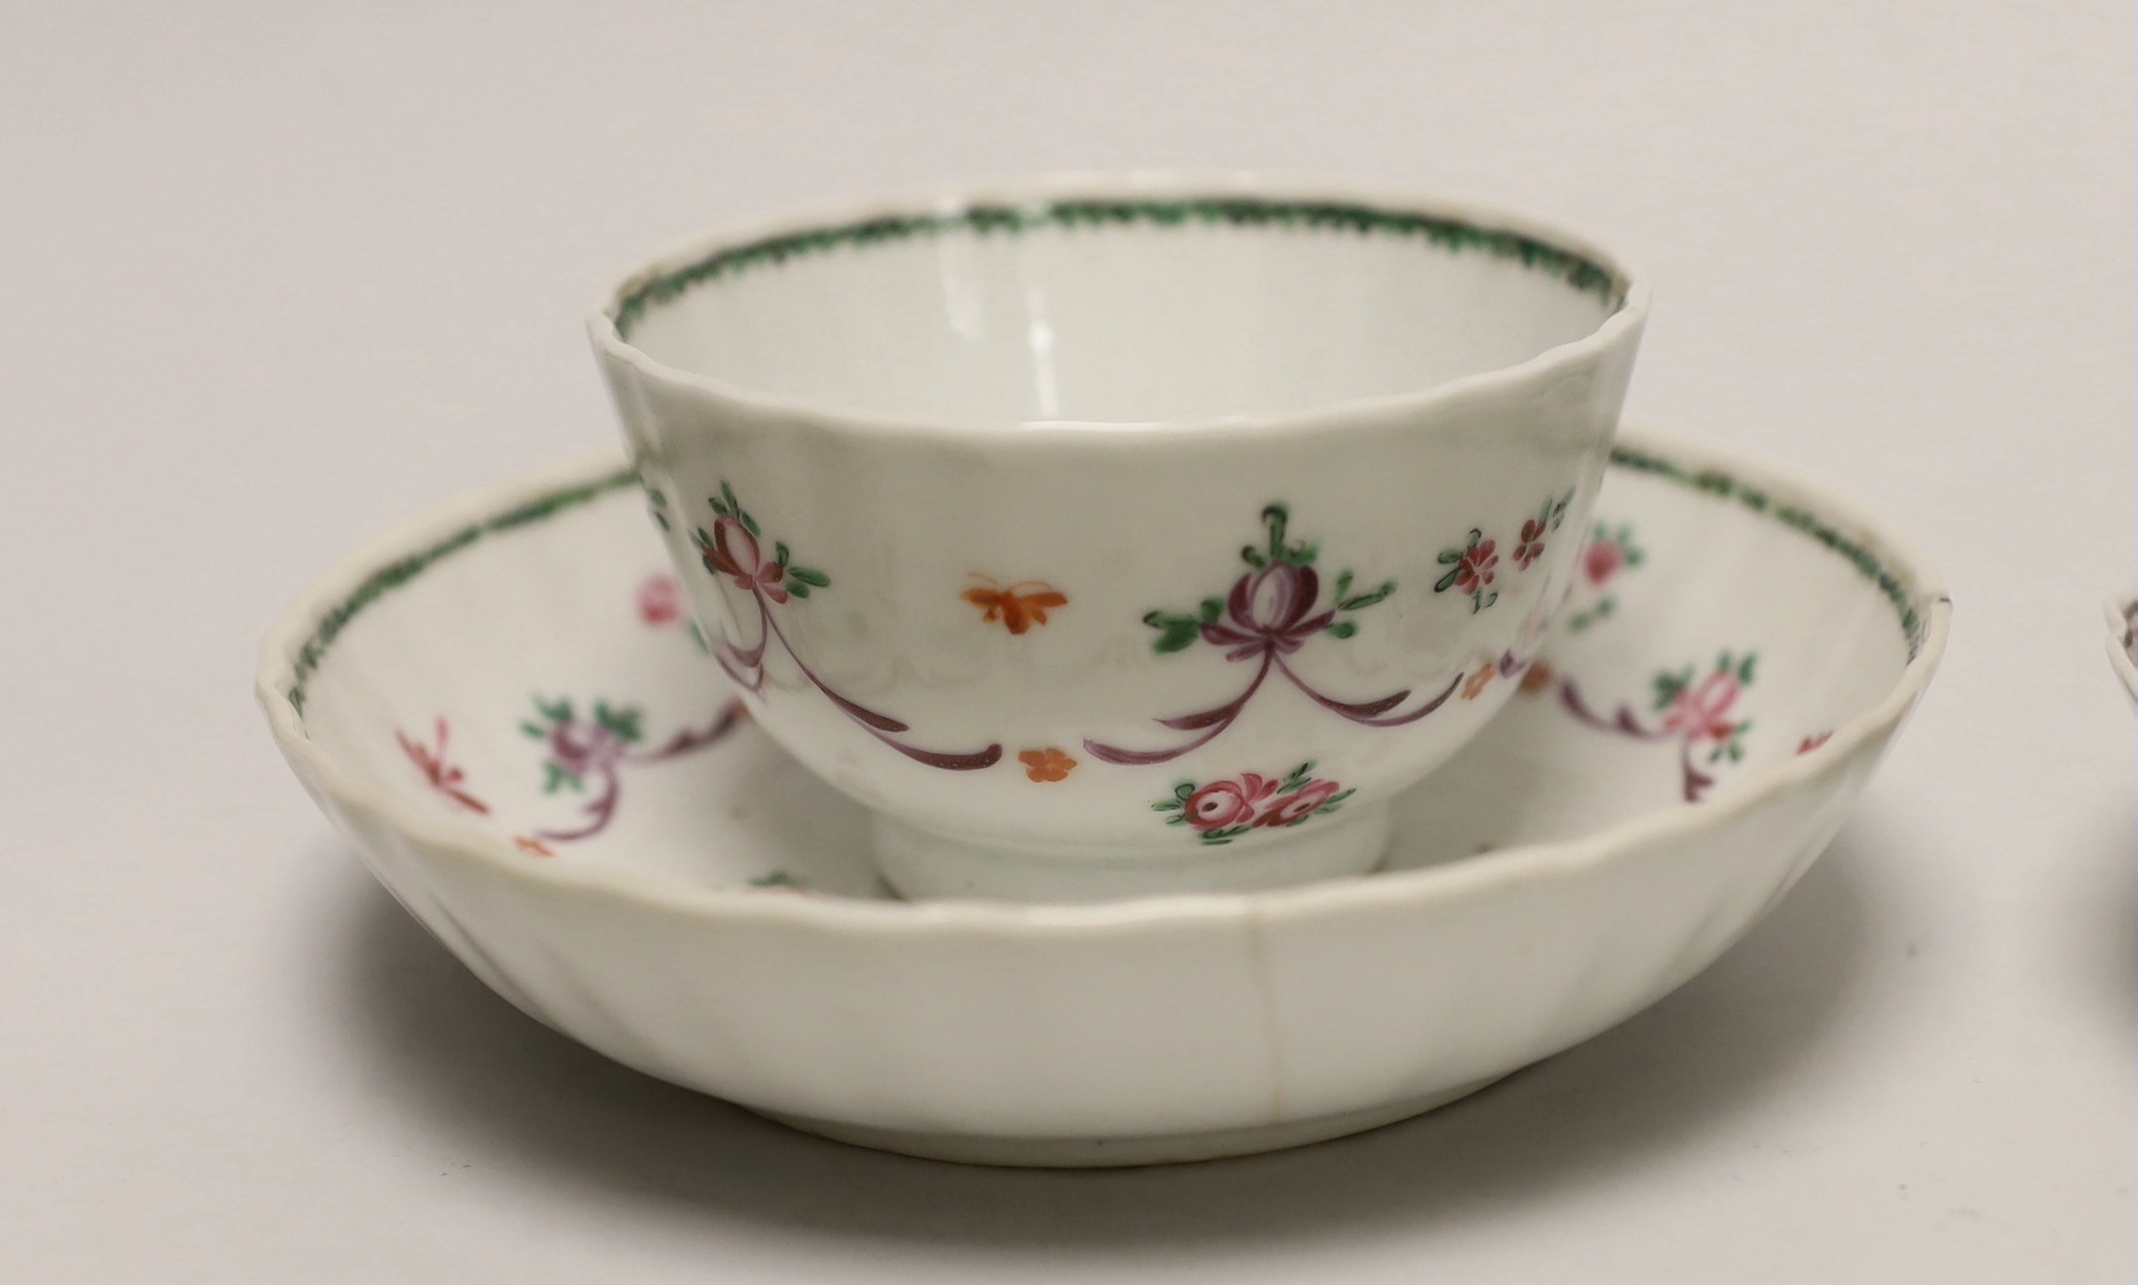 Three 18th century Chinese famille rose tea bowls and matching saucers, a Caughley teabowl and saucer and a single tea bowl and smaller tea bowl